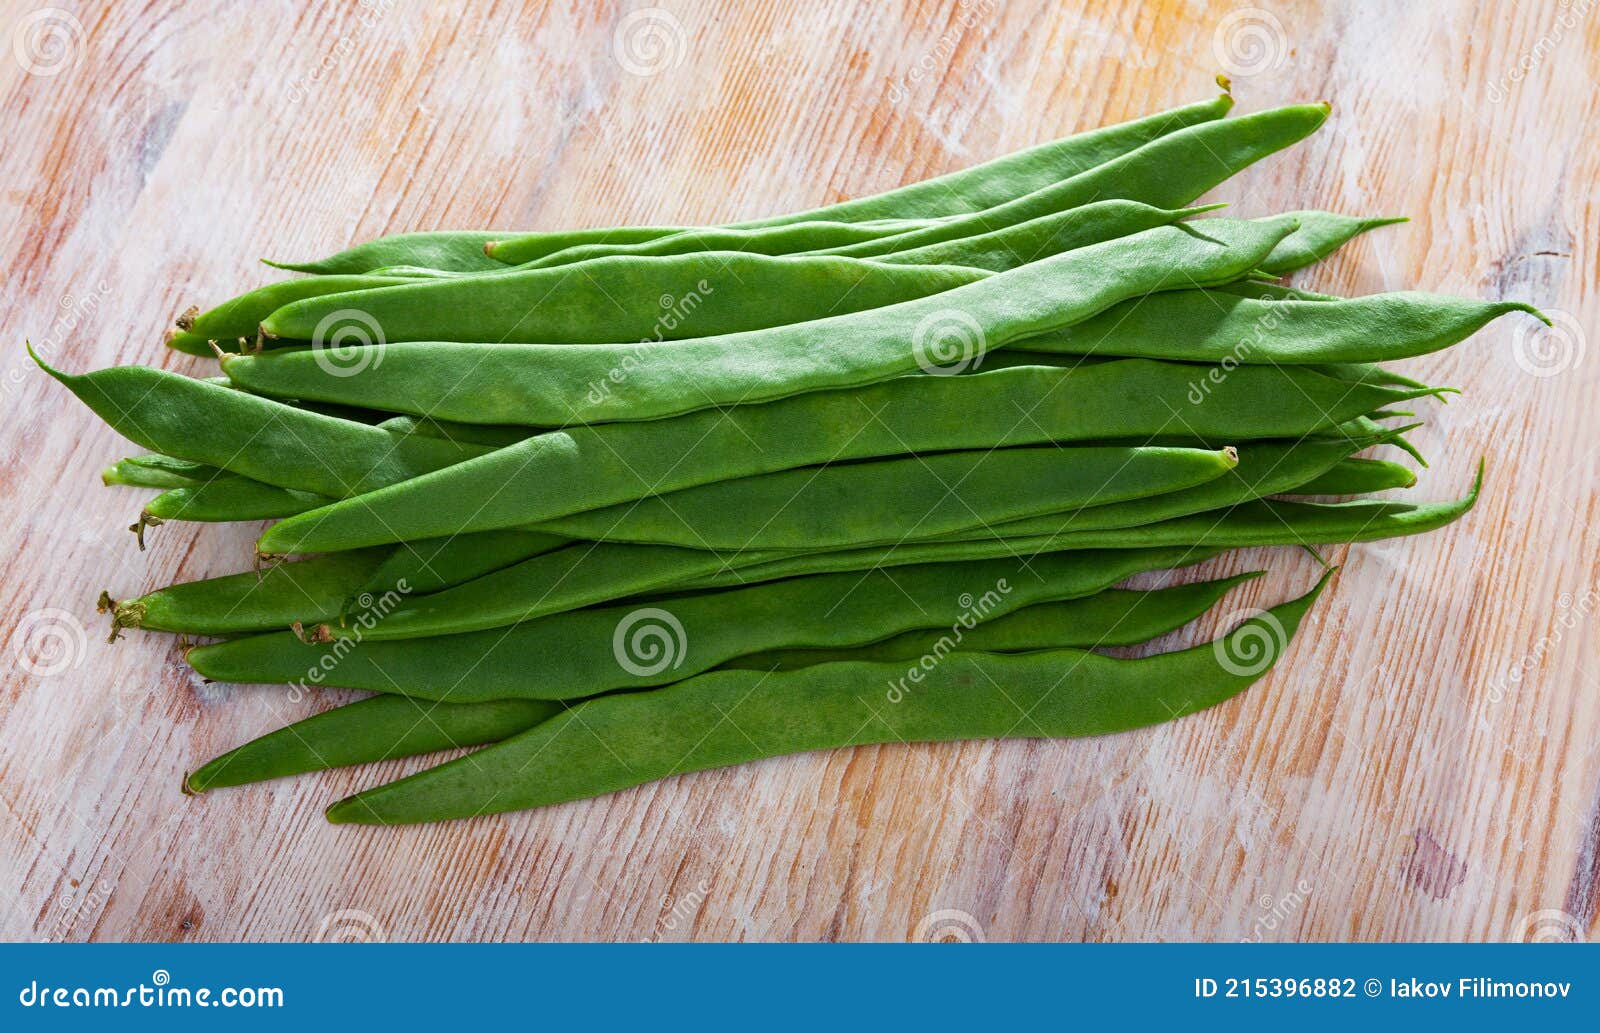 Green Curly Beans on a Wooden Surface Stock Photo - Image of ripe ...